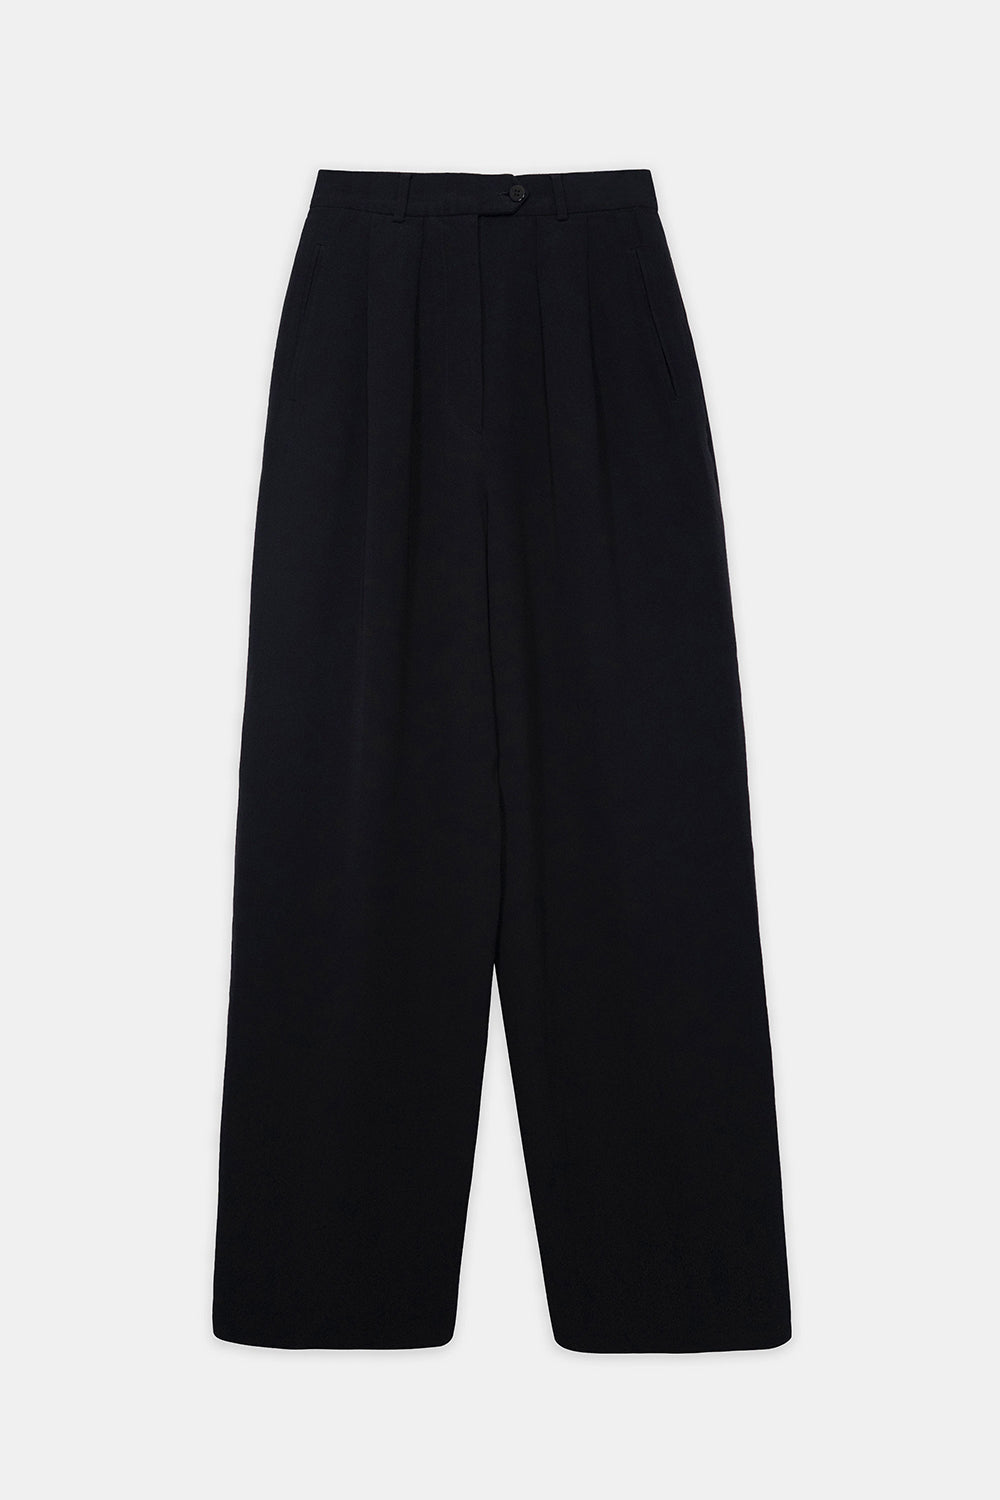 Emporio Armani Vintage Tailored High Waist Trousers Detail